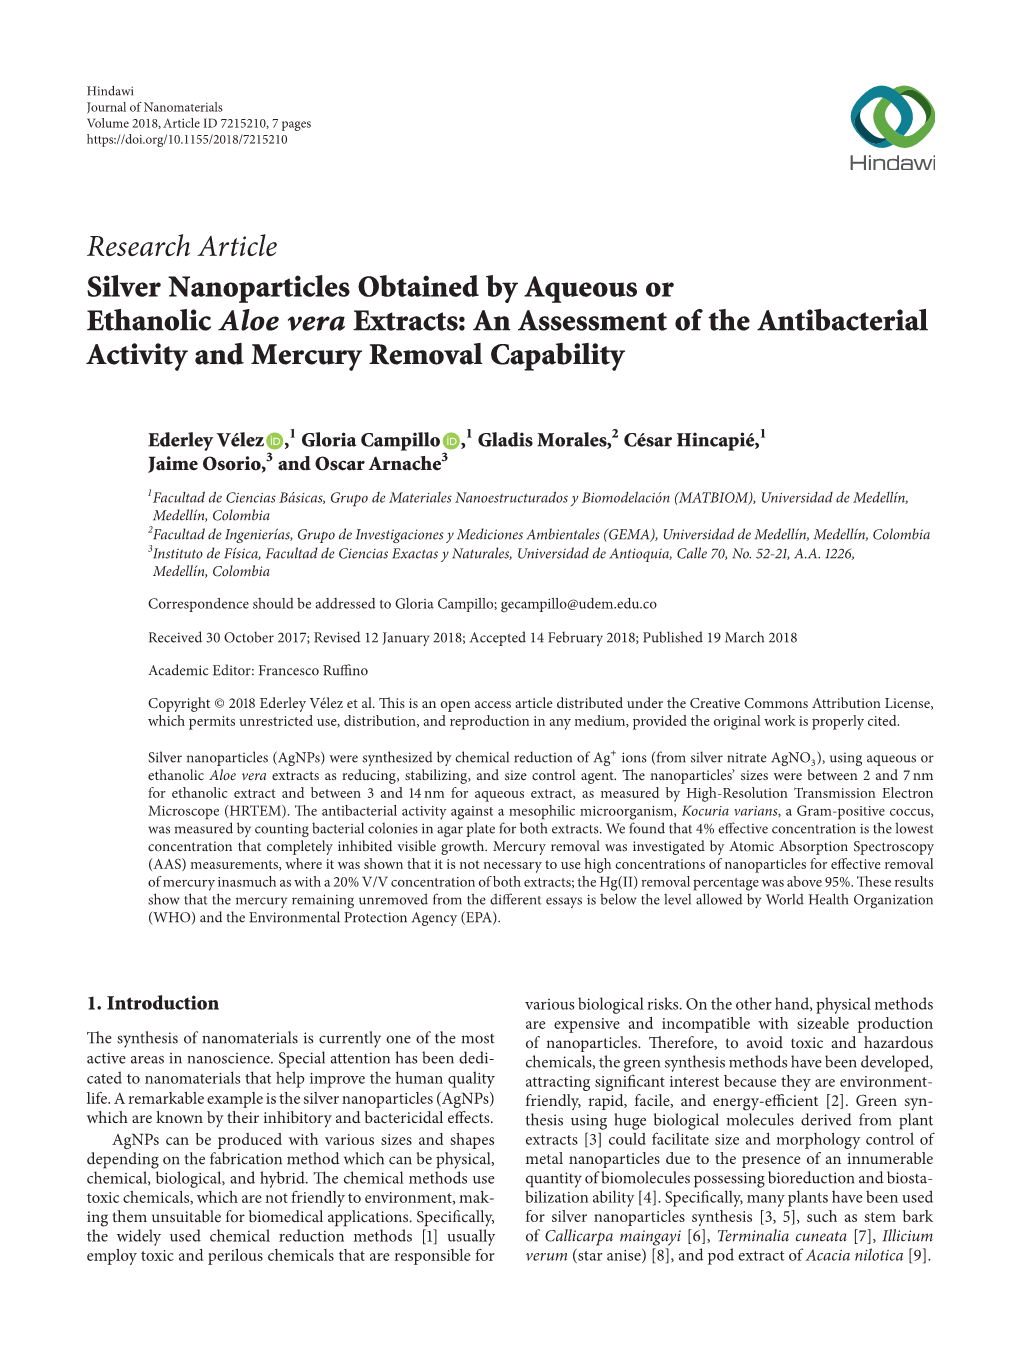 Research Article Silver Nanoparticles Obtained by Aqueous Or Ethanolic Aloe Vera Extracts: an Assessment of the Antibacterial Activity and Mercury Removal Capability